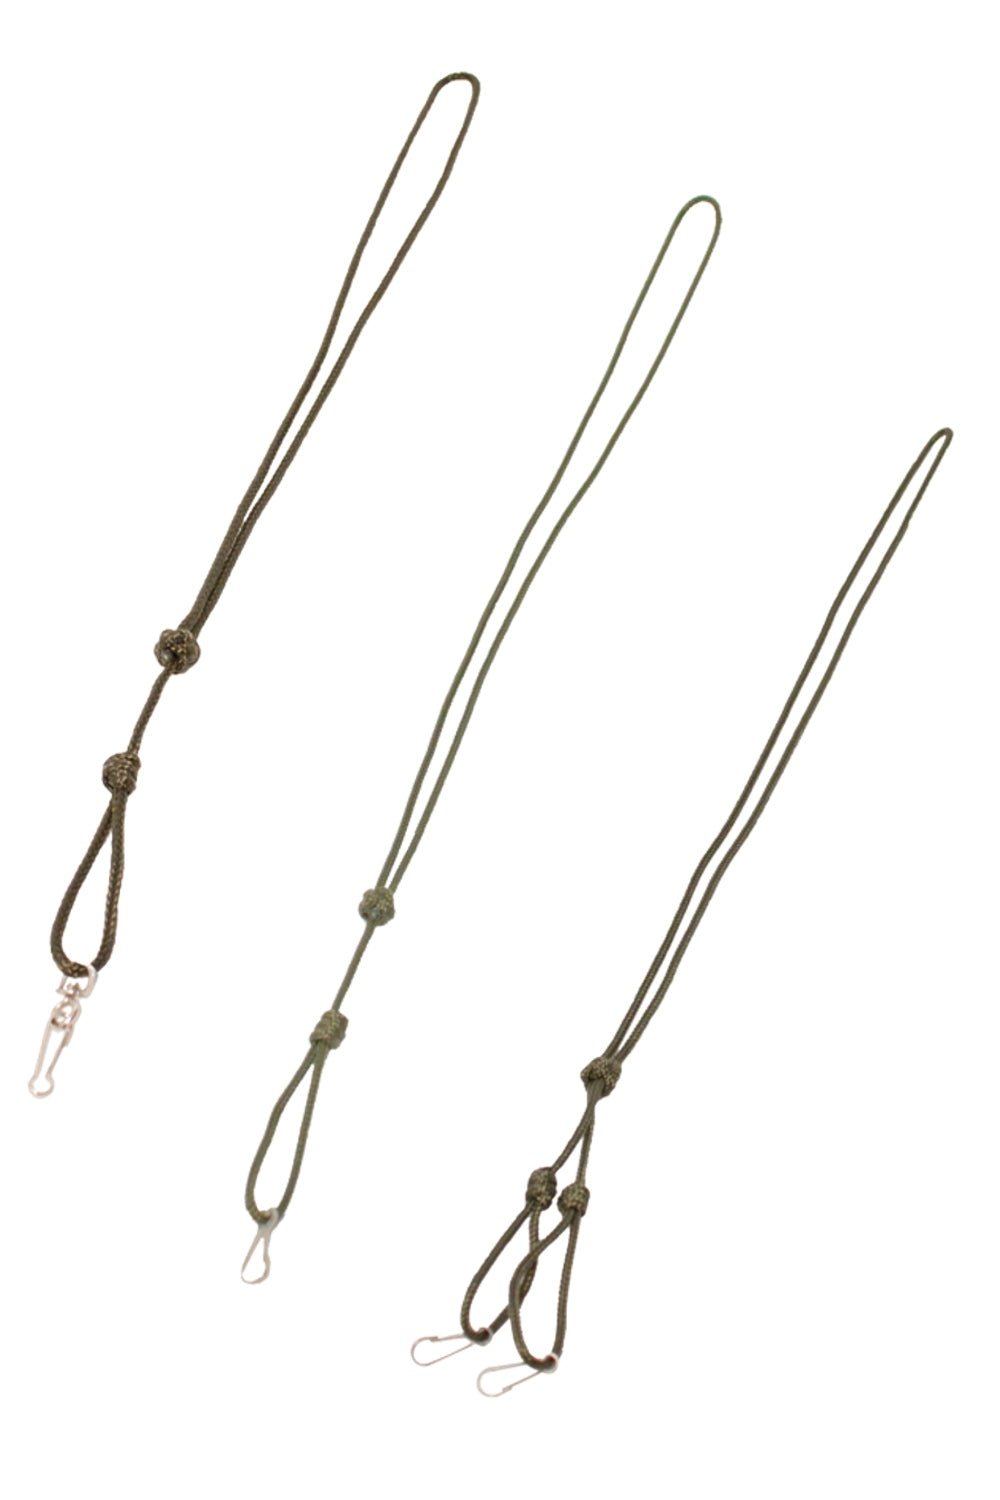 Bisley Traditional Lanyard In 3mm, 3mm (Double Clip, 4mm